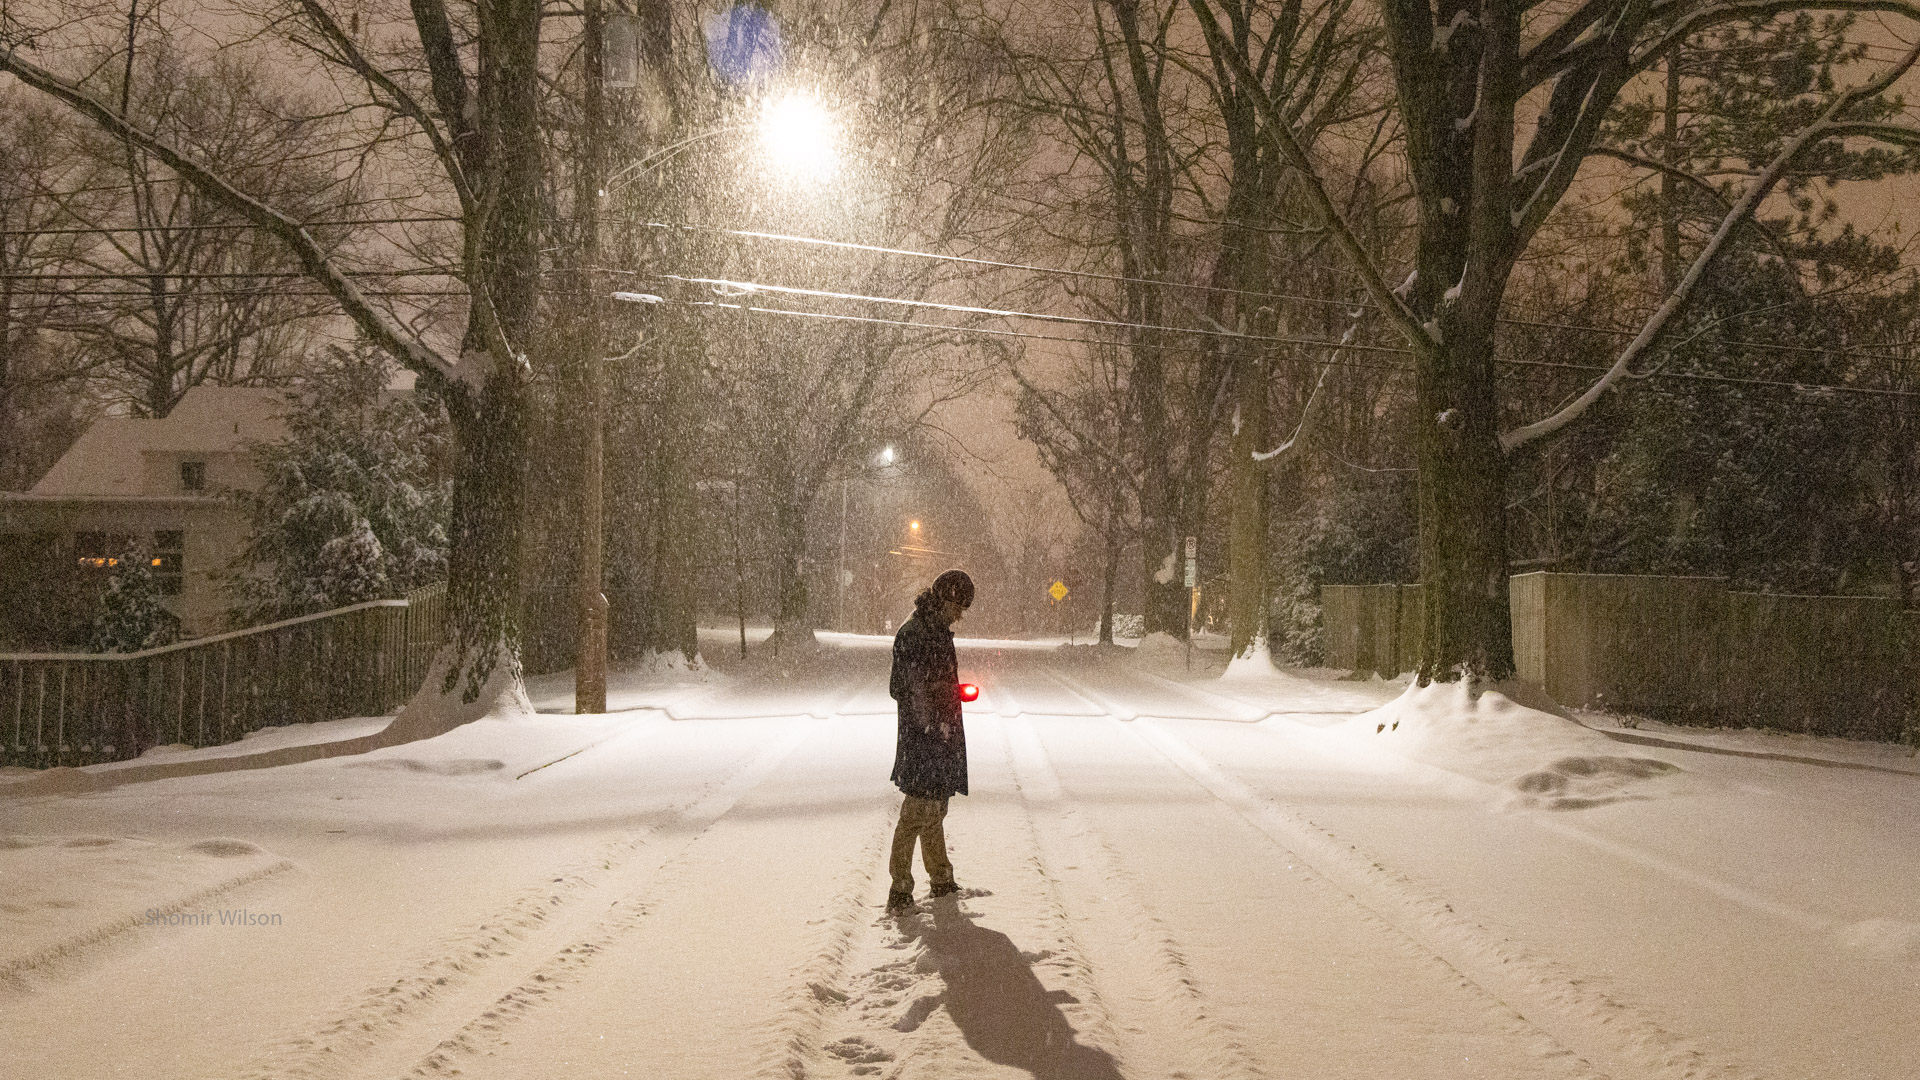 person standing in the middle of a snowy residential neighborhood street at night, standing in profile, holding a mysterious bright red light